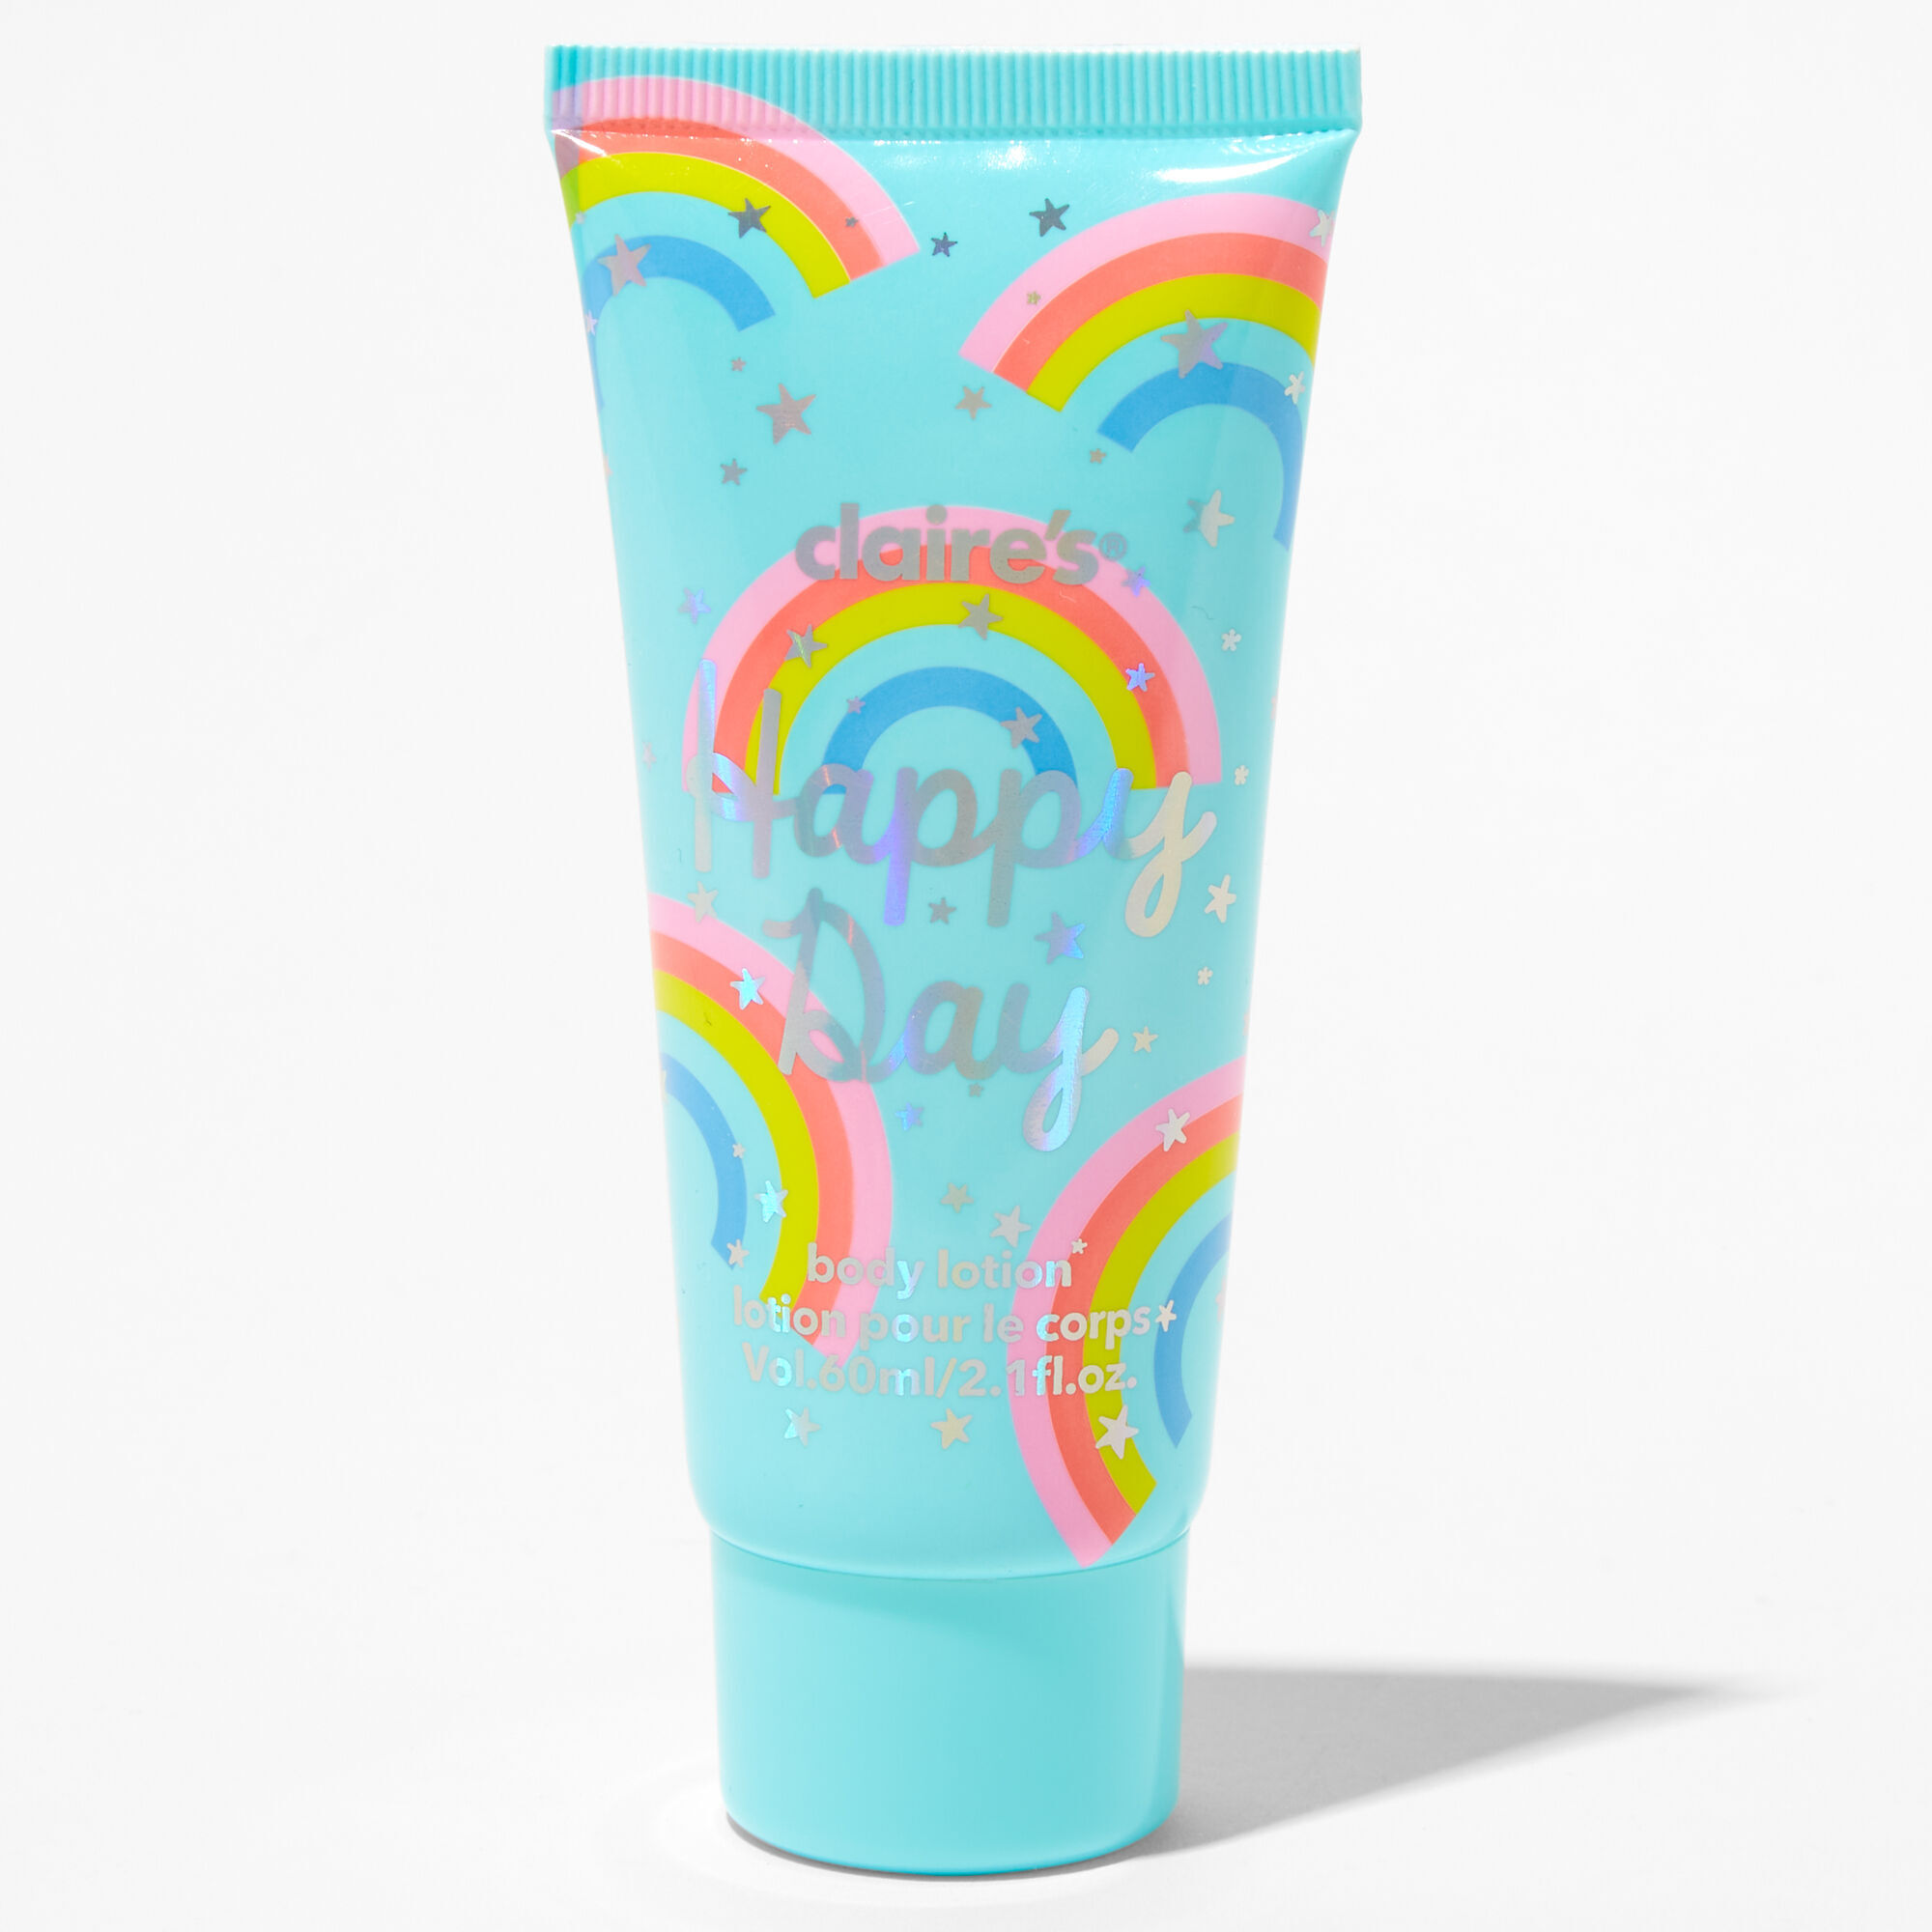 View Claires Happy Day Watermelon Scented Body Lotion Rainbow information